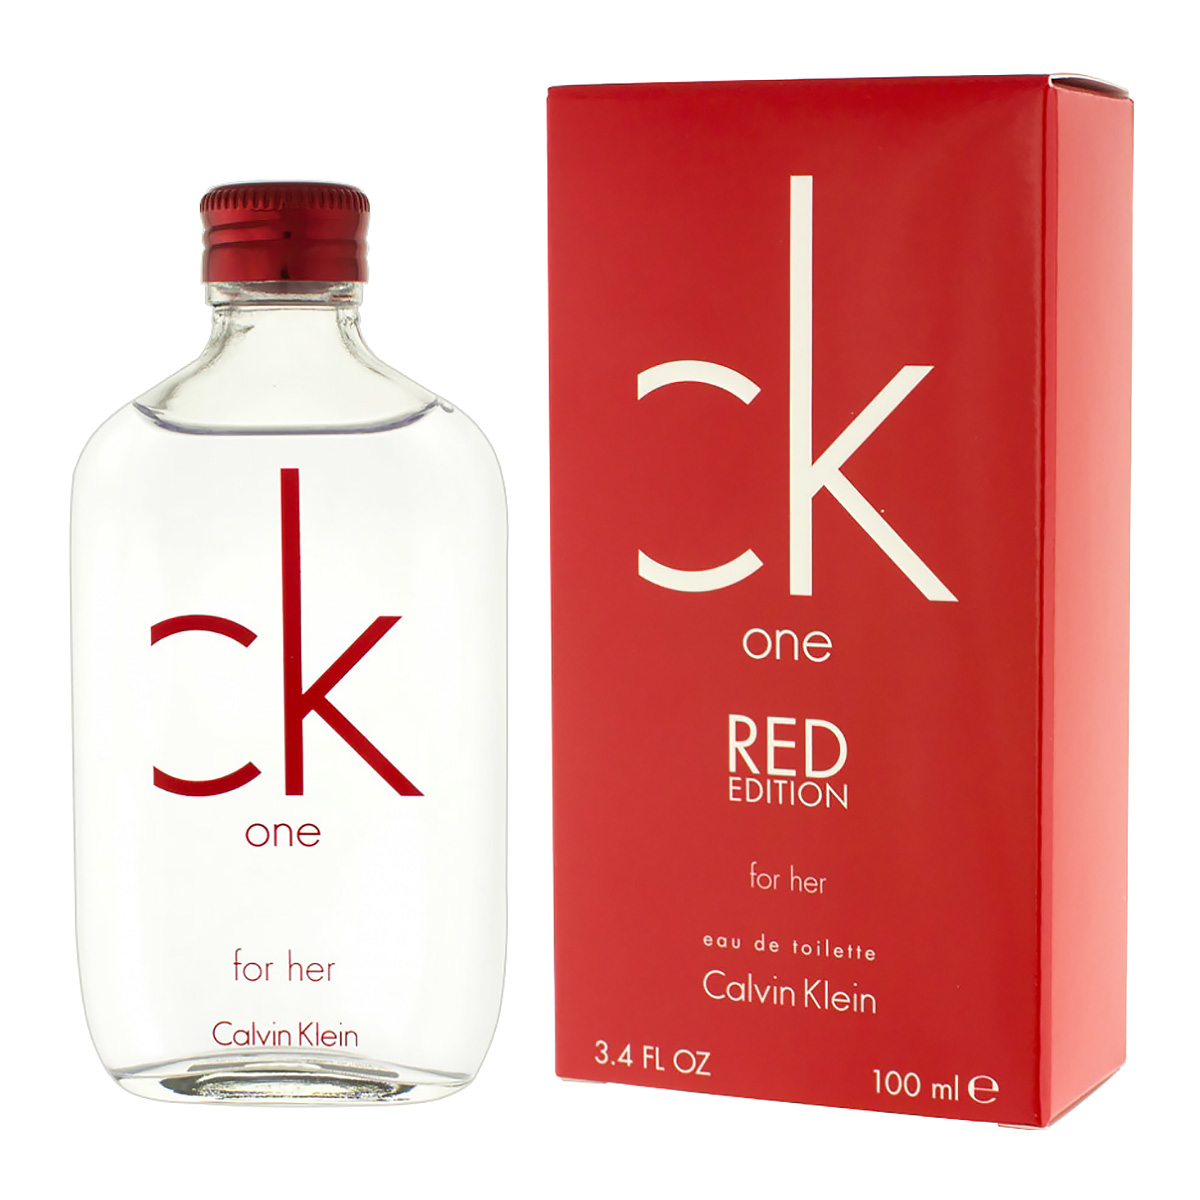 CALVIN KLEIN CK ONE RED EDITION FOR HER